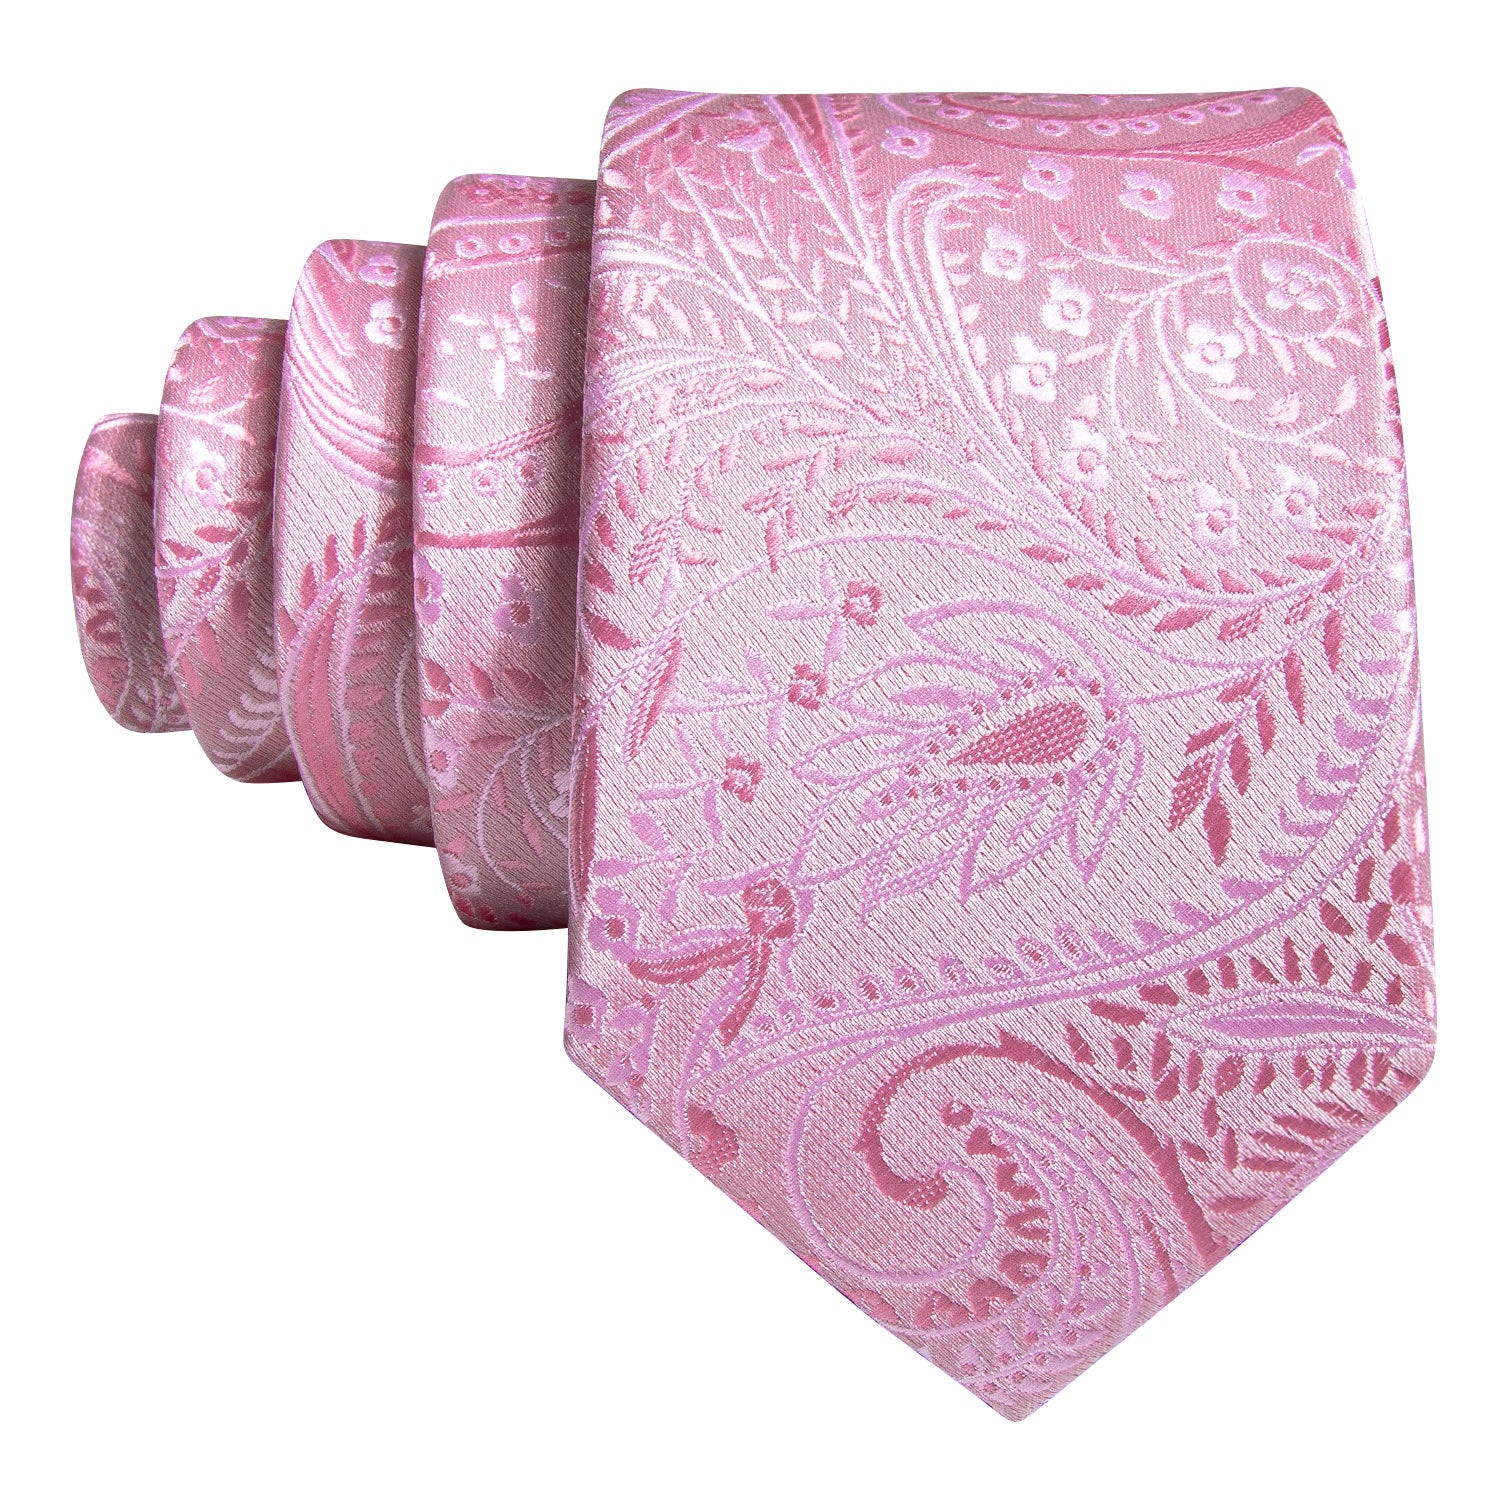 Barry.wang Kids Tie Pink Woven Paisley Children Tie Pocket Square Set